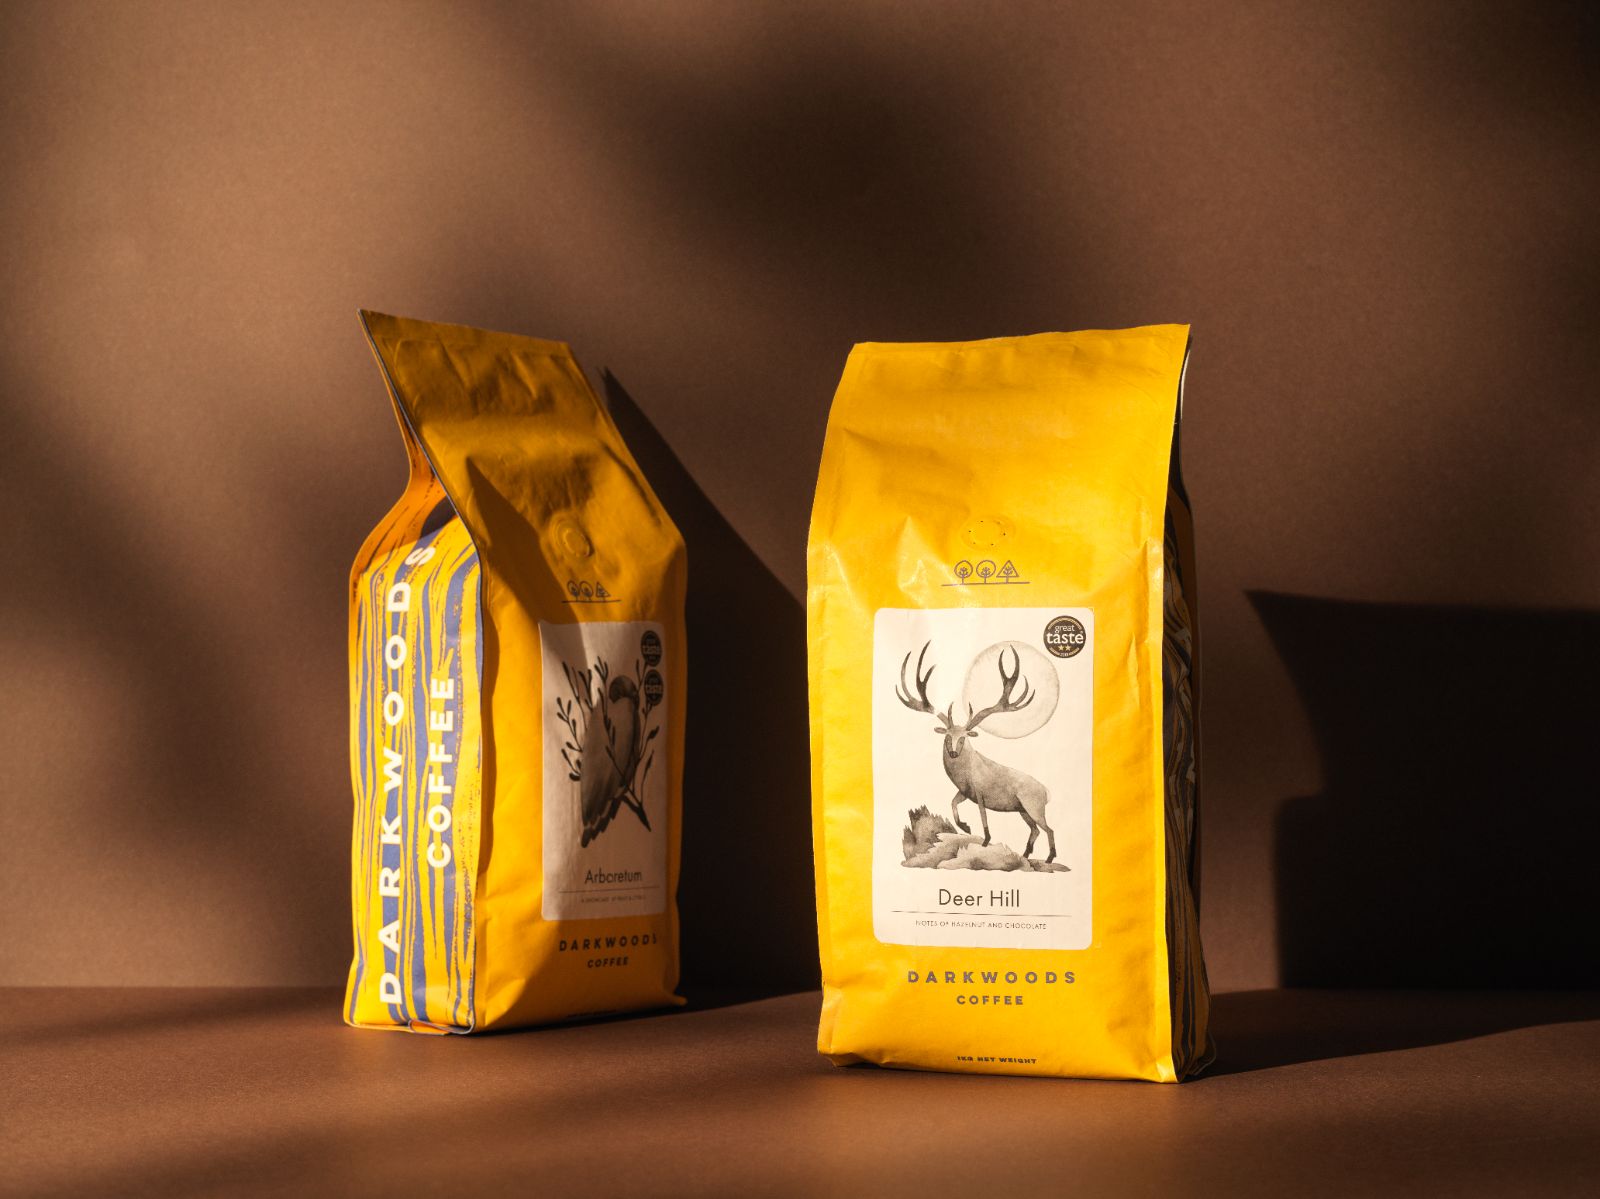 93 branding for Dark woods wholesale coffee. Two yellow bags with an owl and stag motif. Great Taste award sticker on bag. 